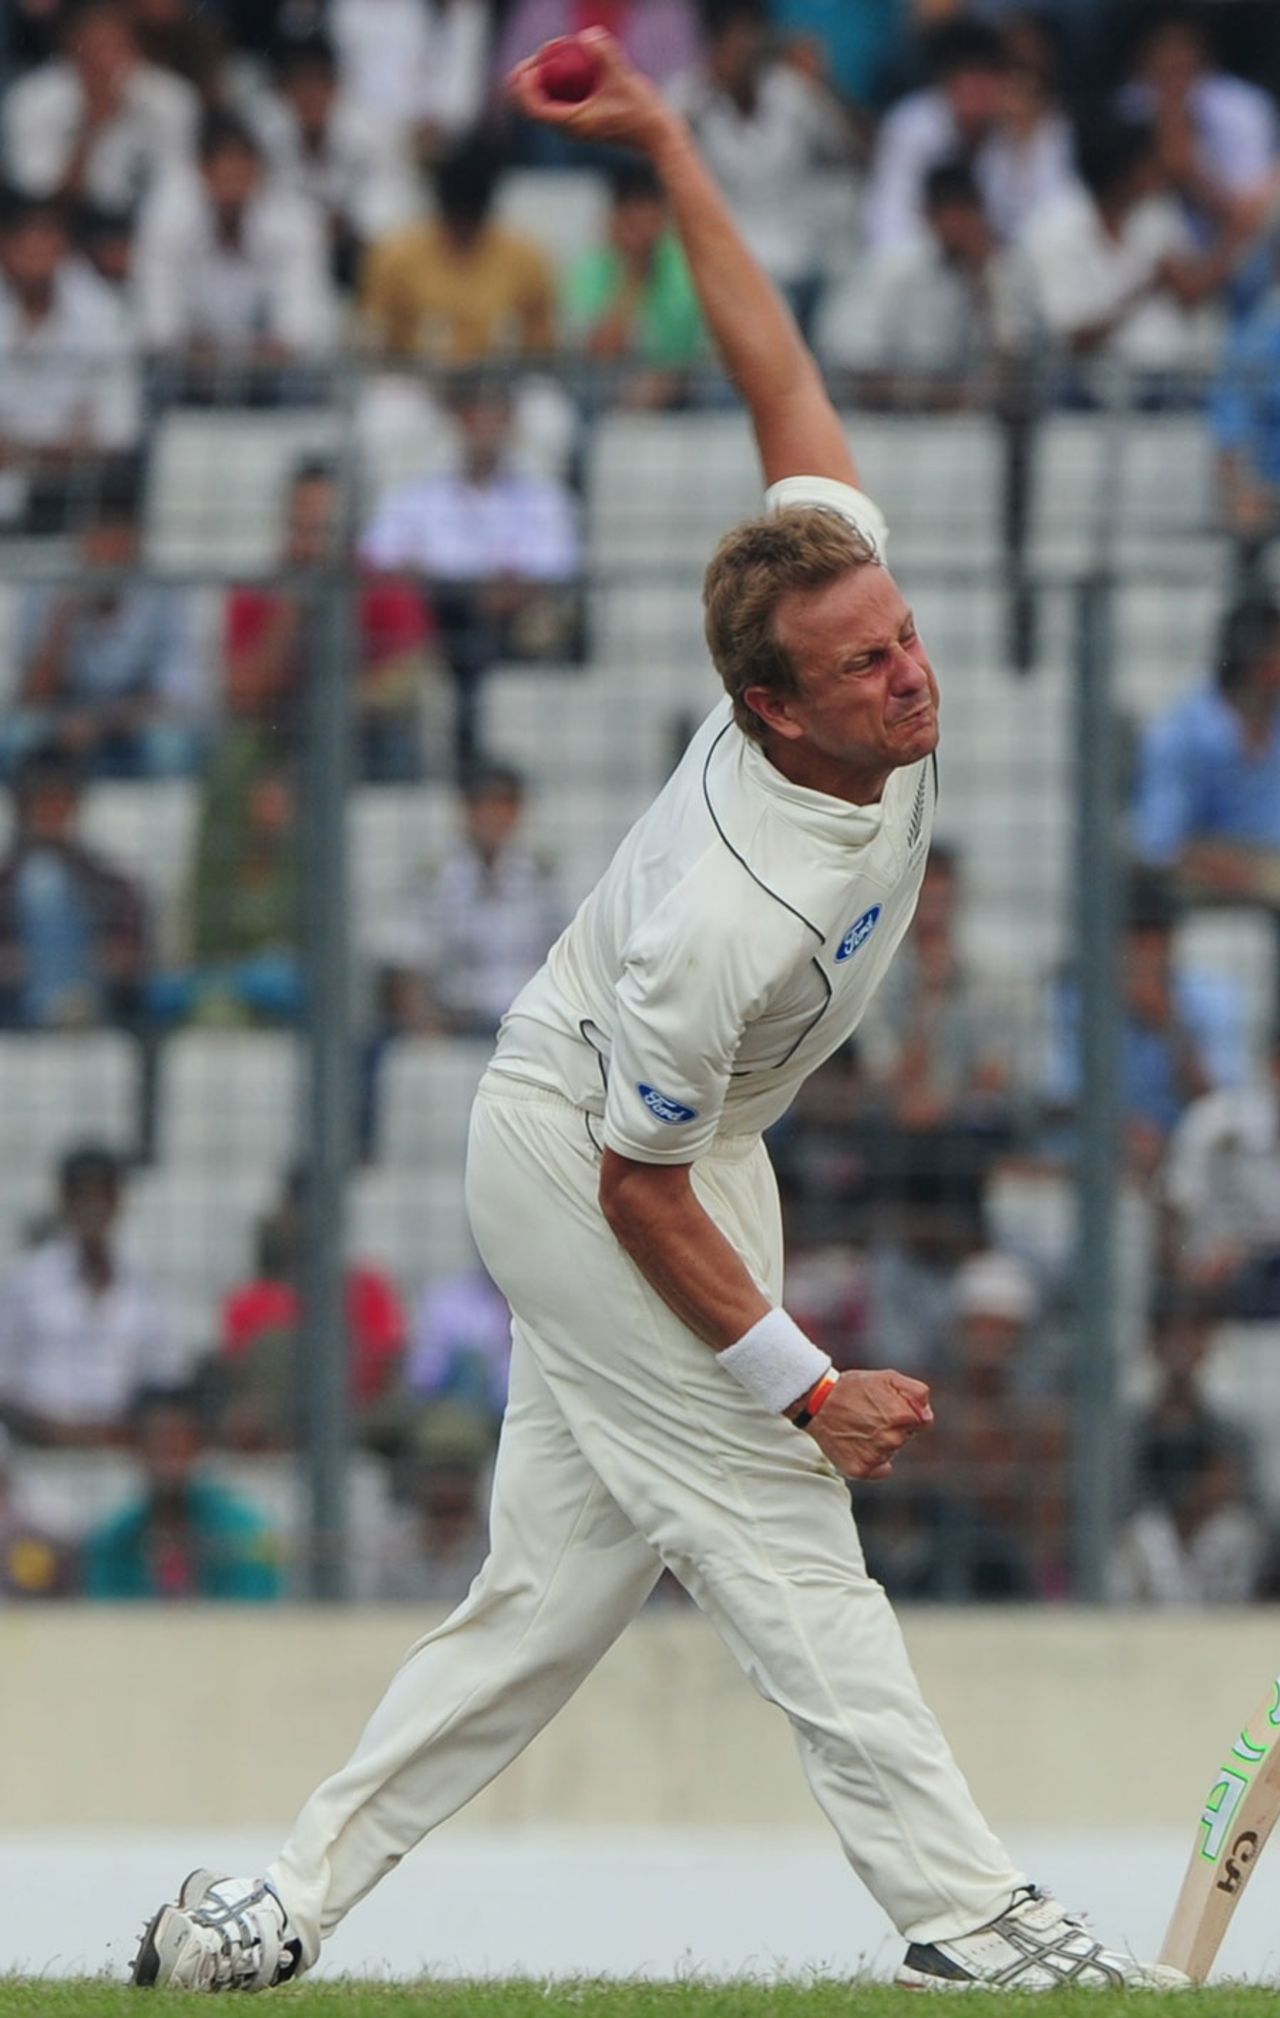 Neil Wagner in his bowling stride, Bangladesh v New Zealand, 2nd Test, 4th day, Mirpur, October 24, 2013